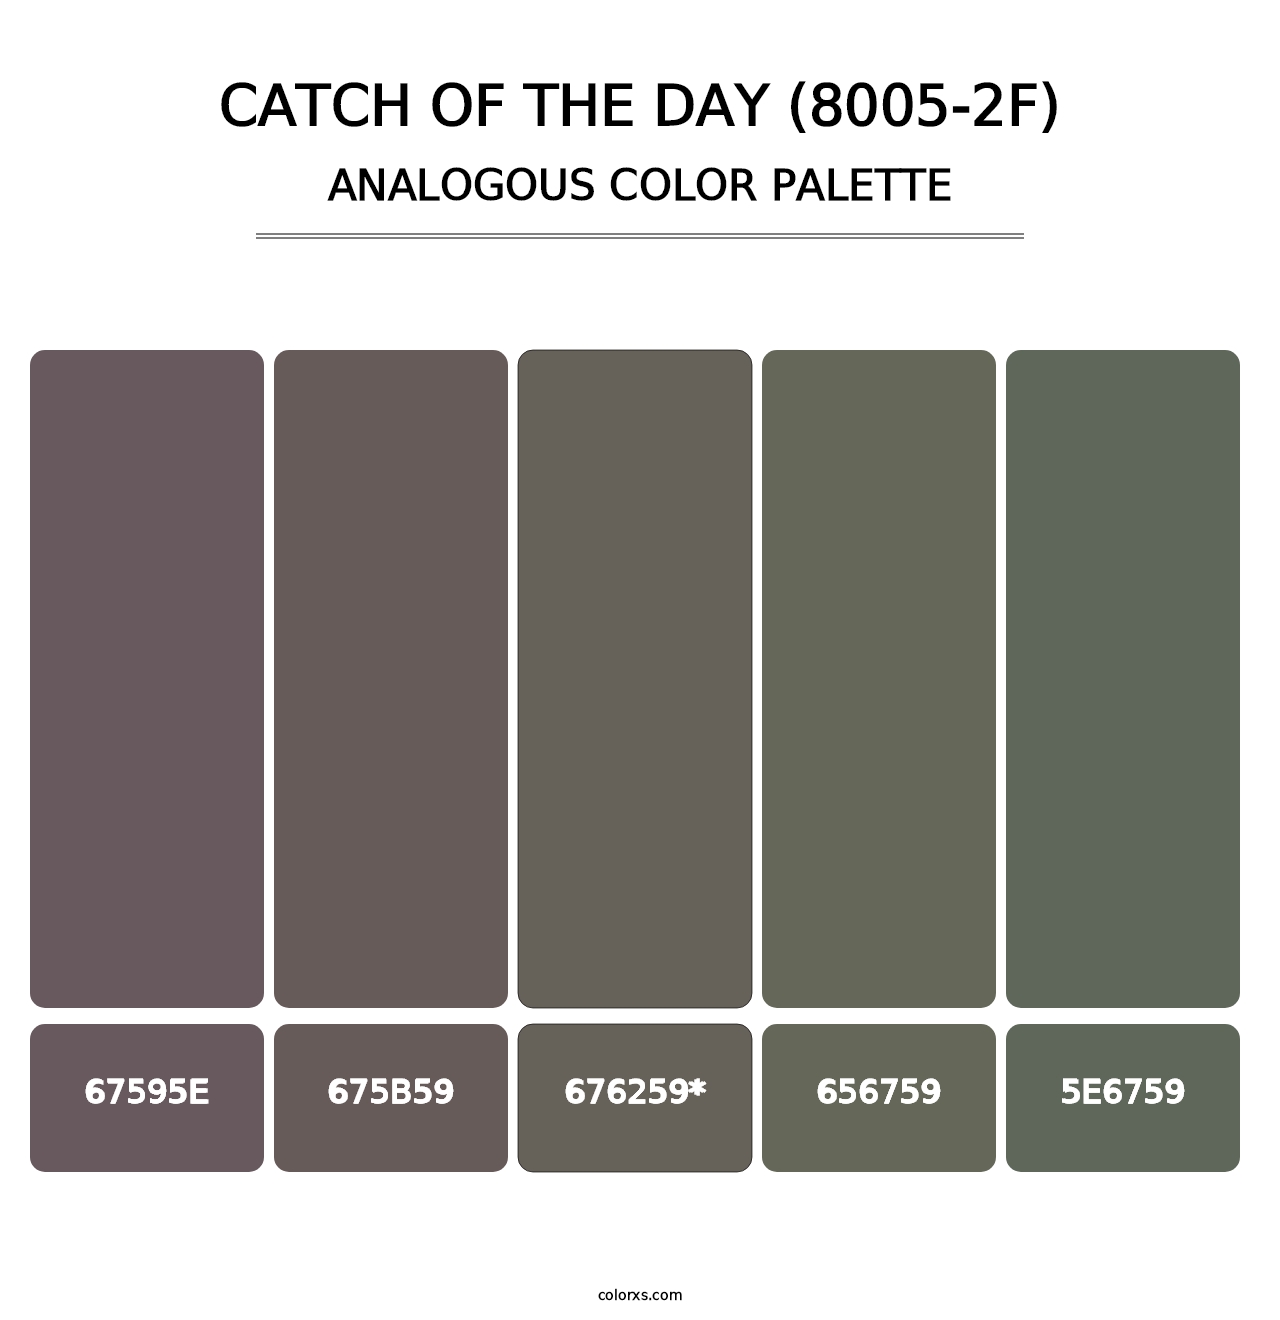 Catch of the Day (8005-2F) - Analogous Color Palette